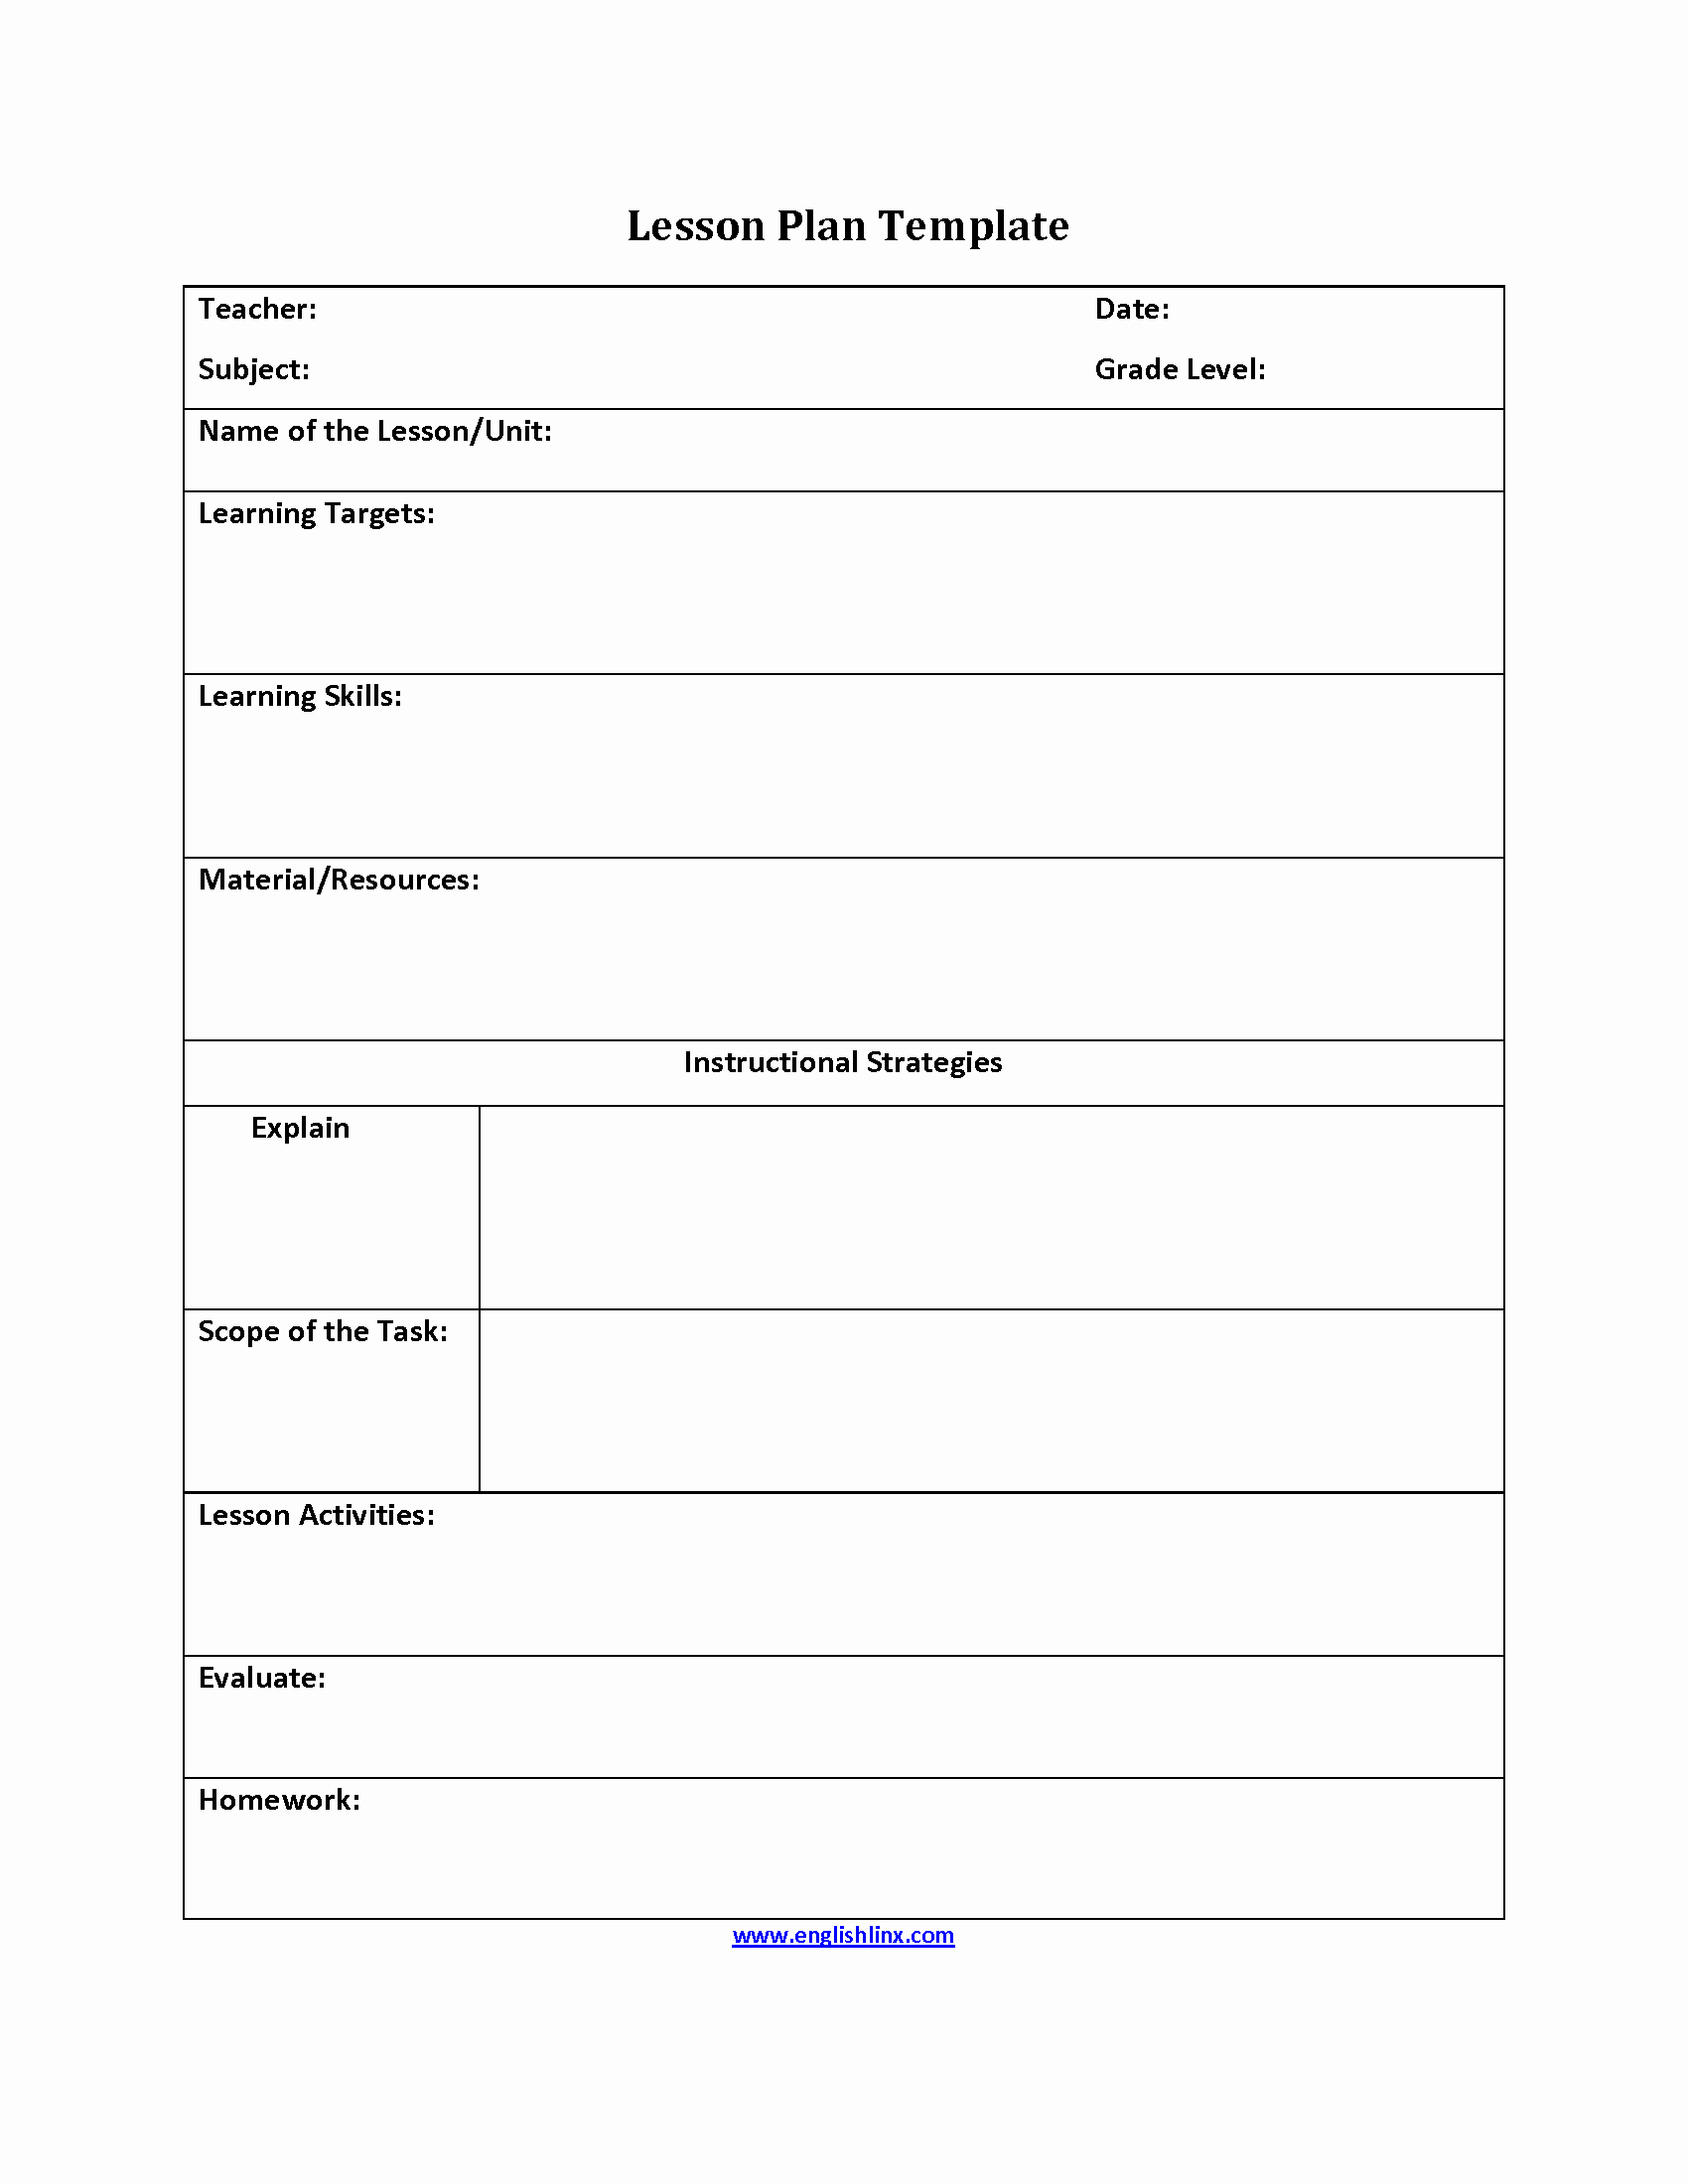 Blank Lesson Plan Template Free Unique Instructional Strategies Lesson Plan Template